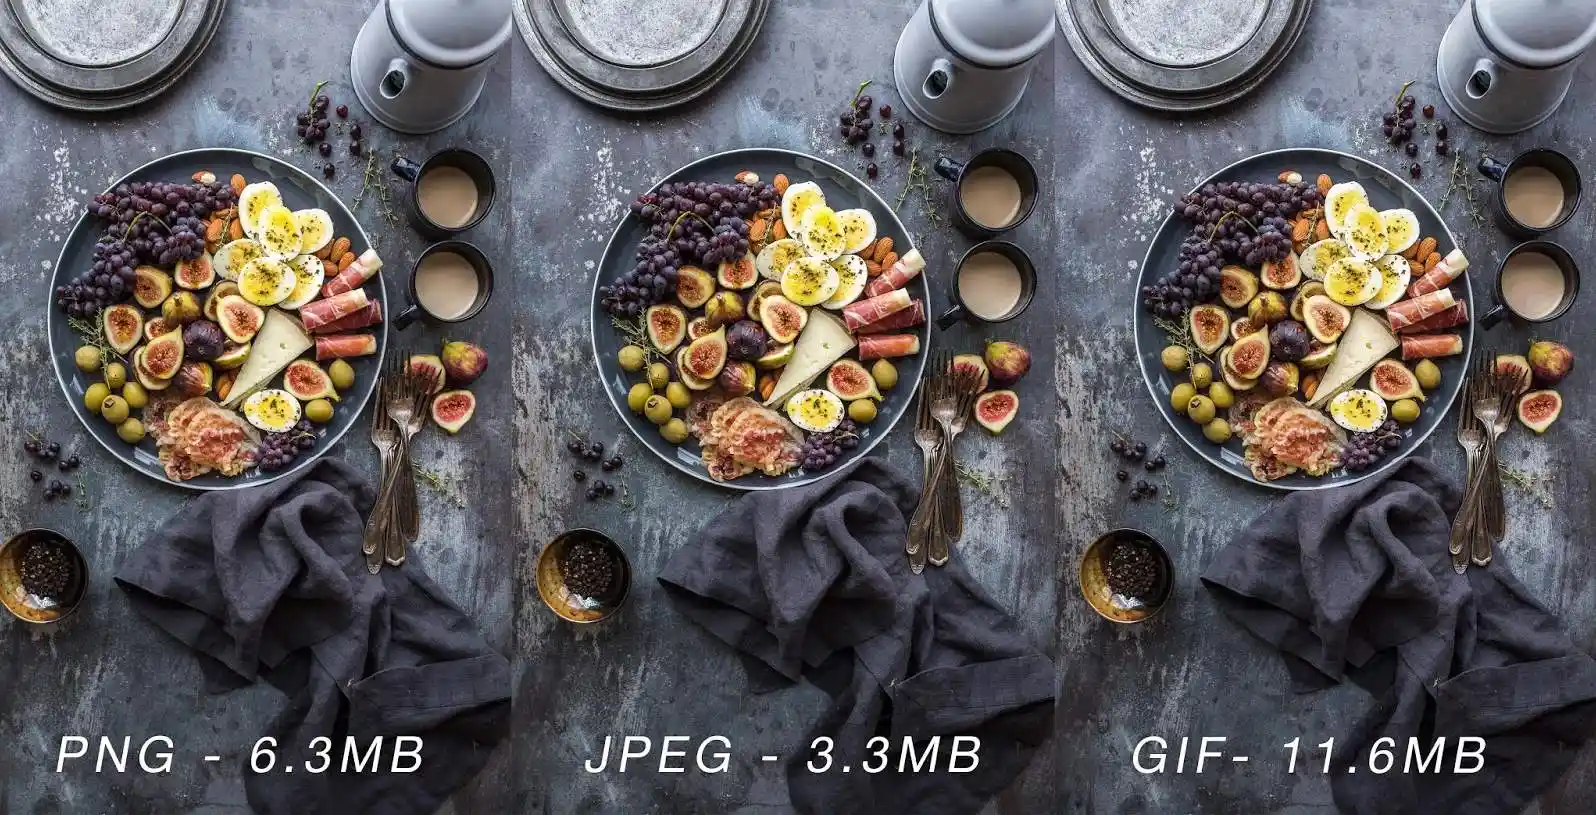 File size comparison of JPEG, PNG, and GIF